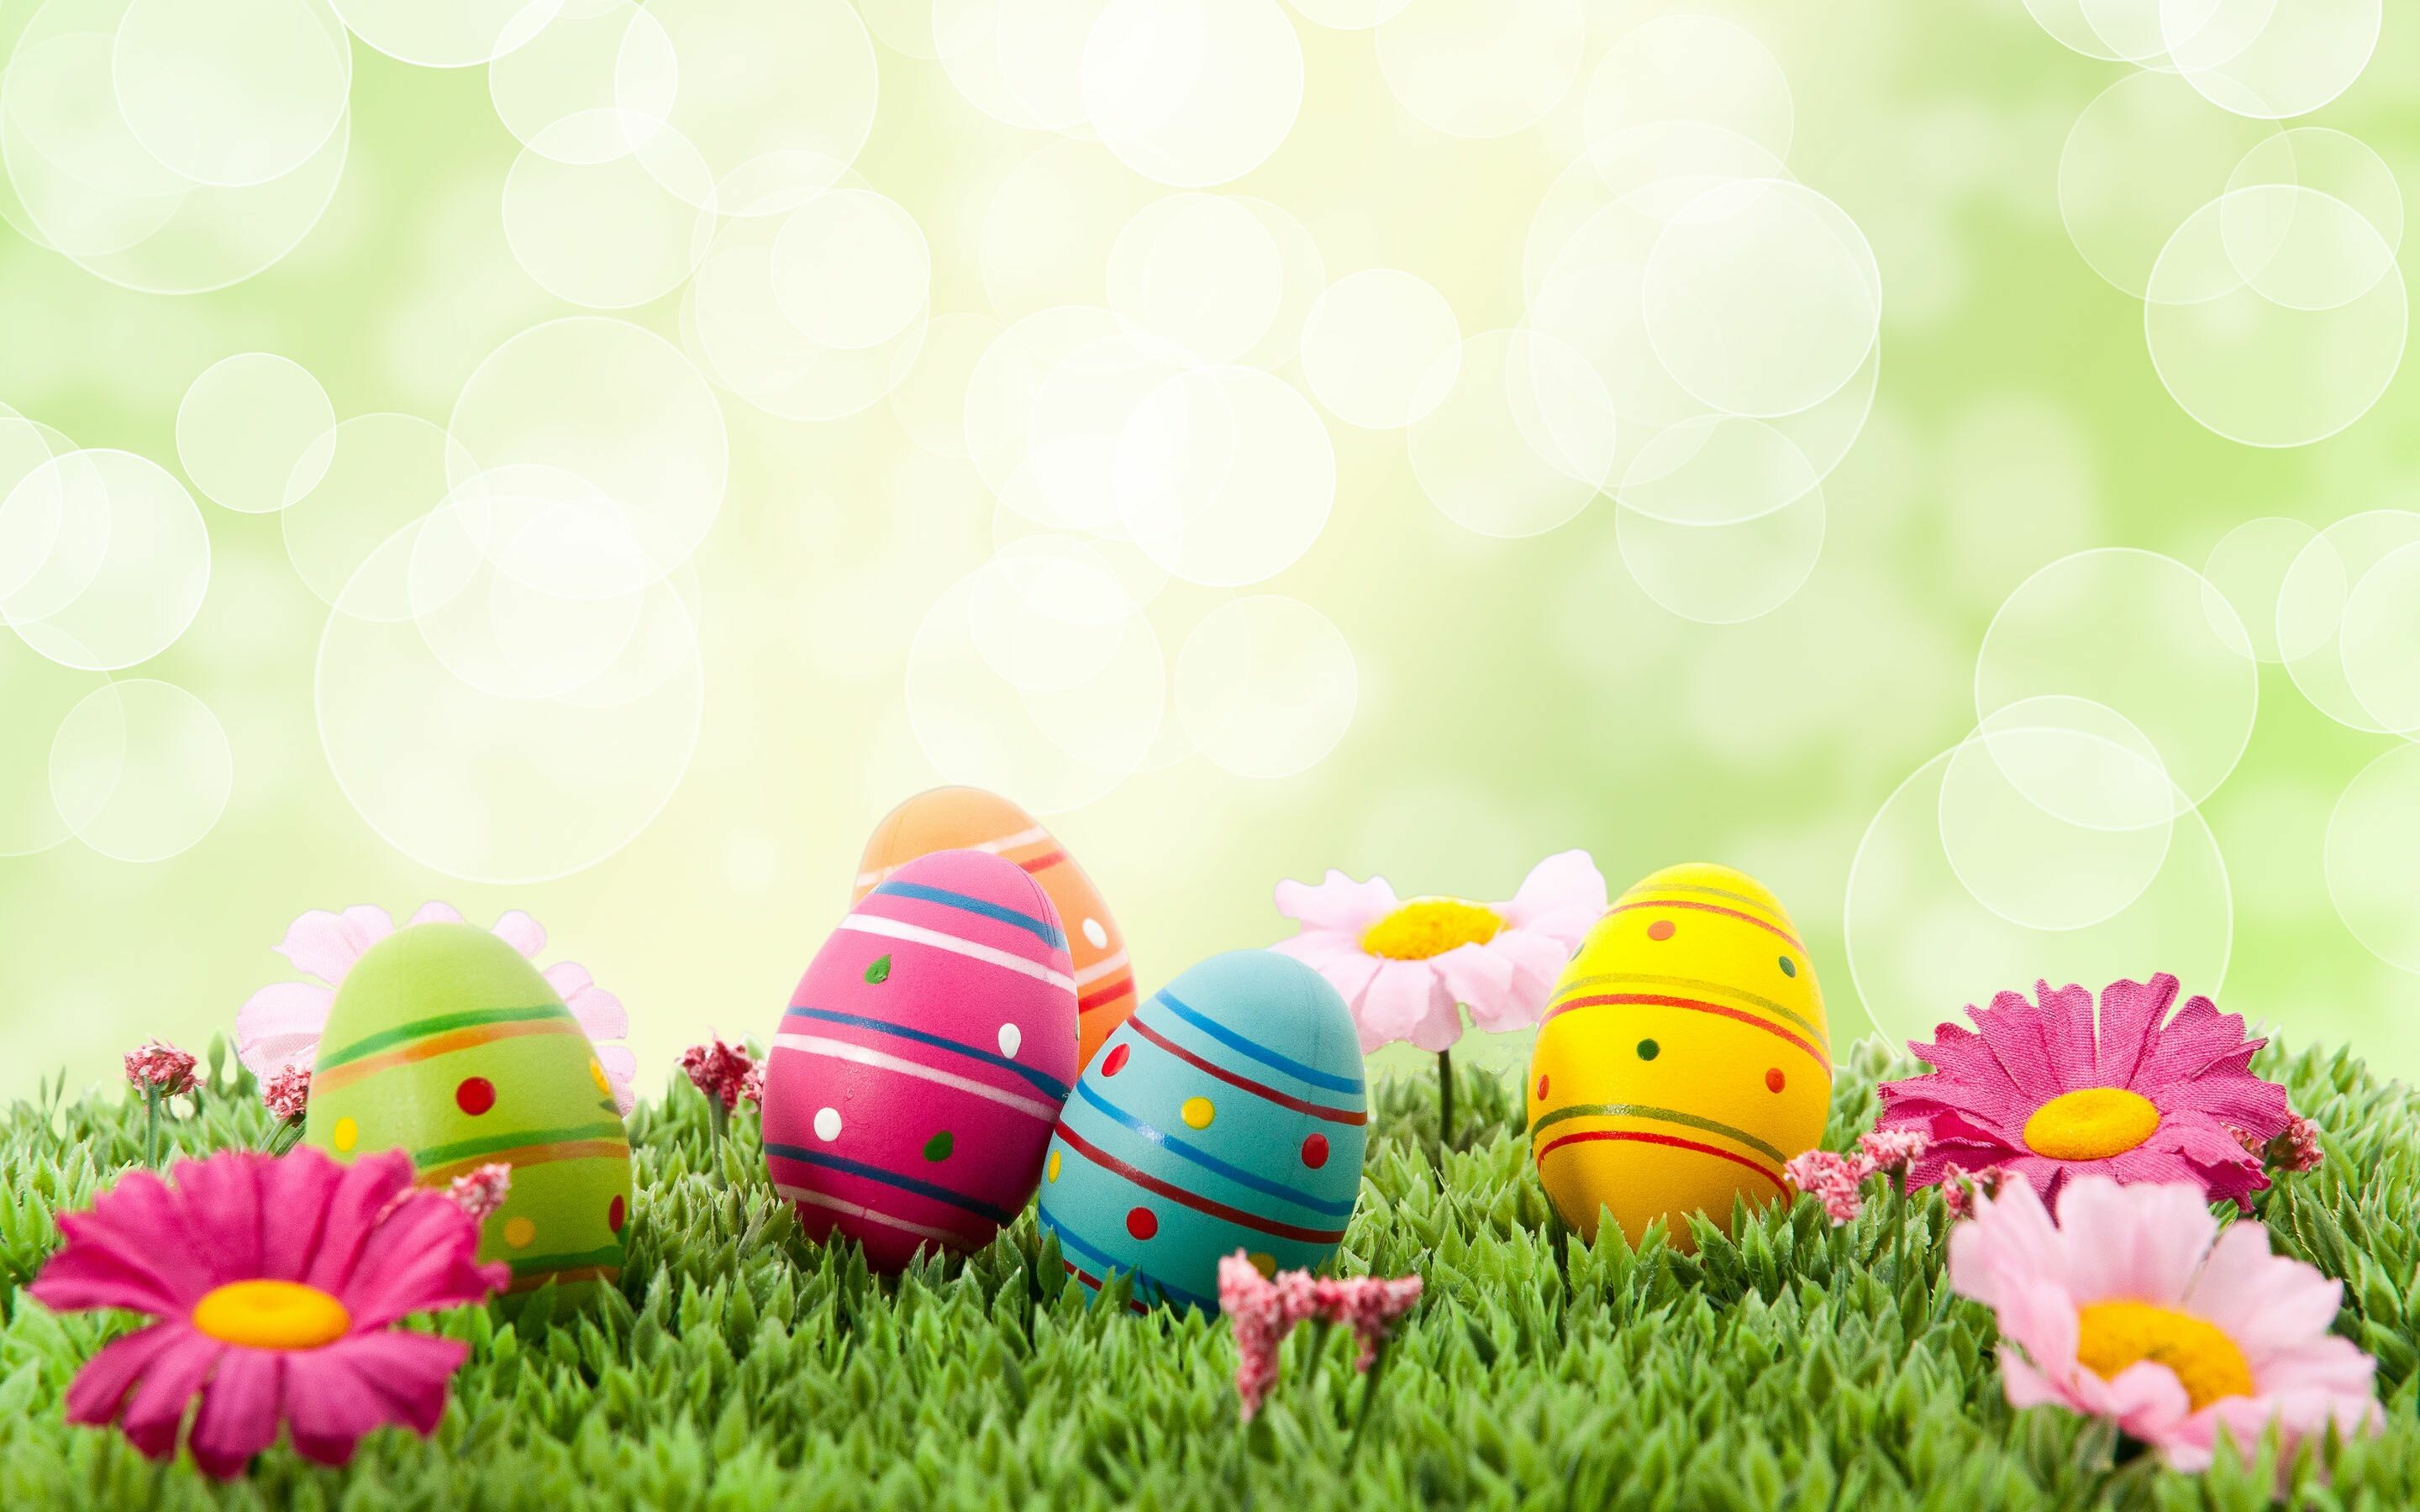 Easter Wallpaper: HD, 4K, 5K for PC and Mobile. Download free image for iPhone, Android